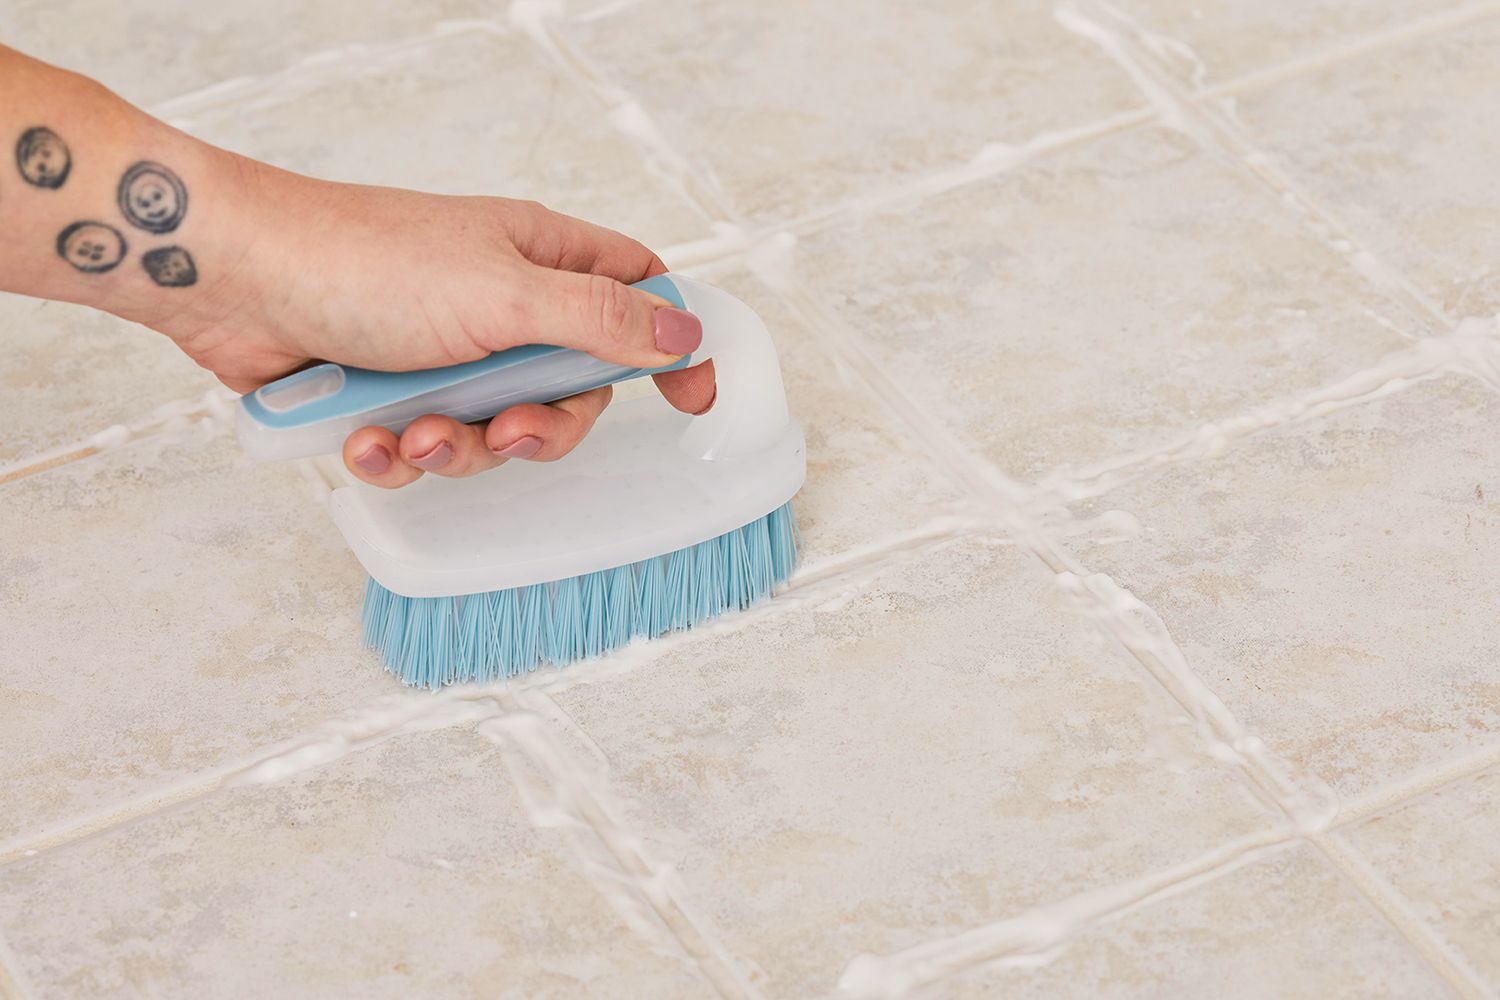 How To Clean The Bathroom Floor With A Power Cleaning Brush?